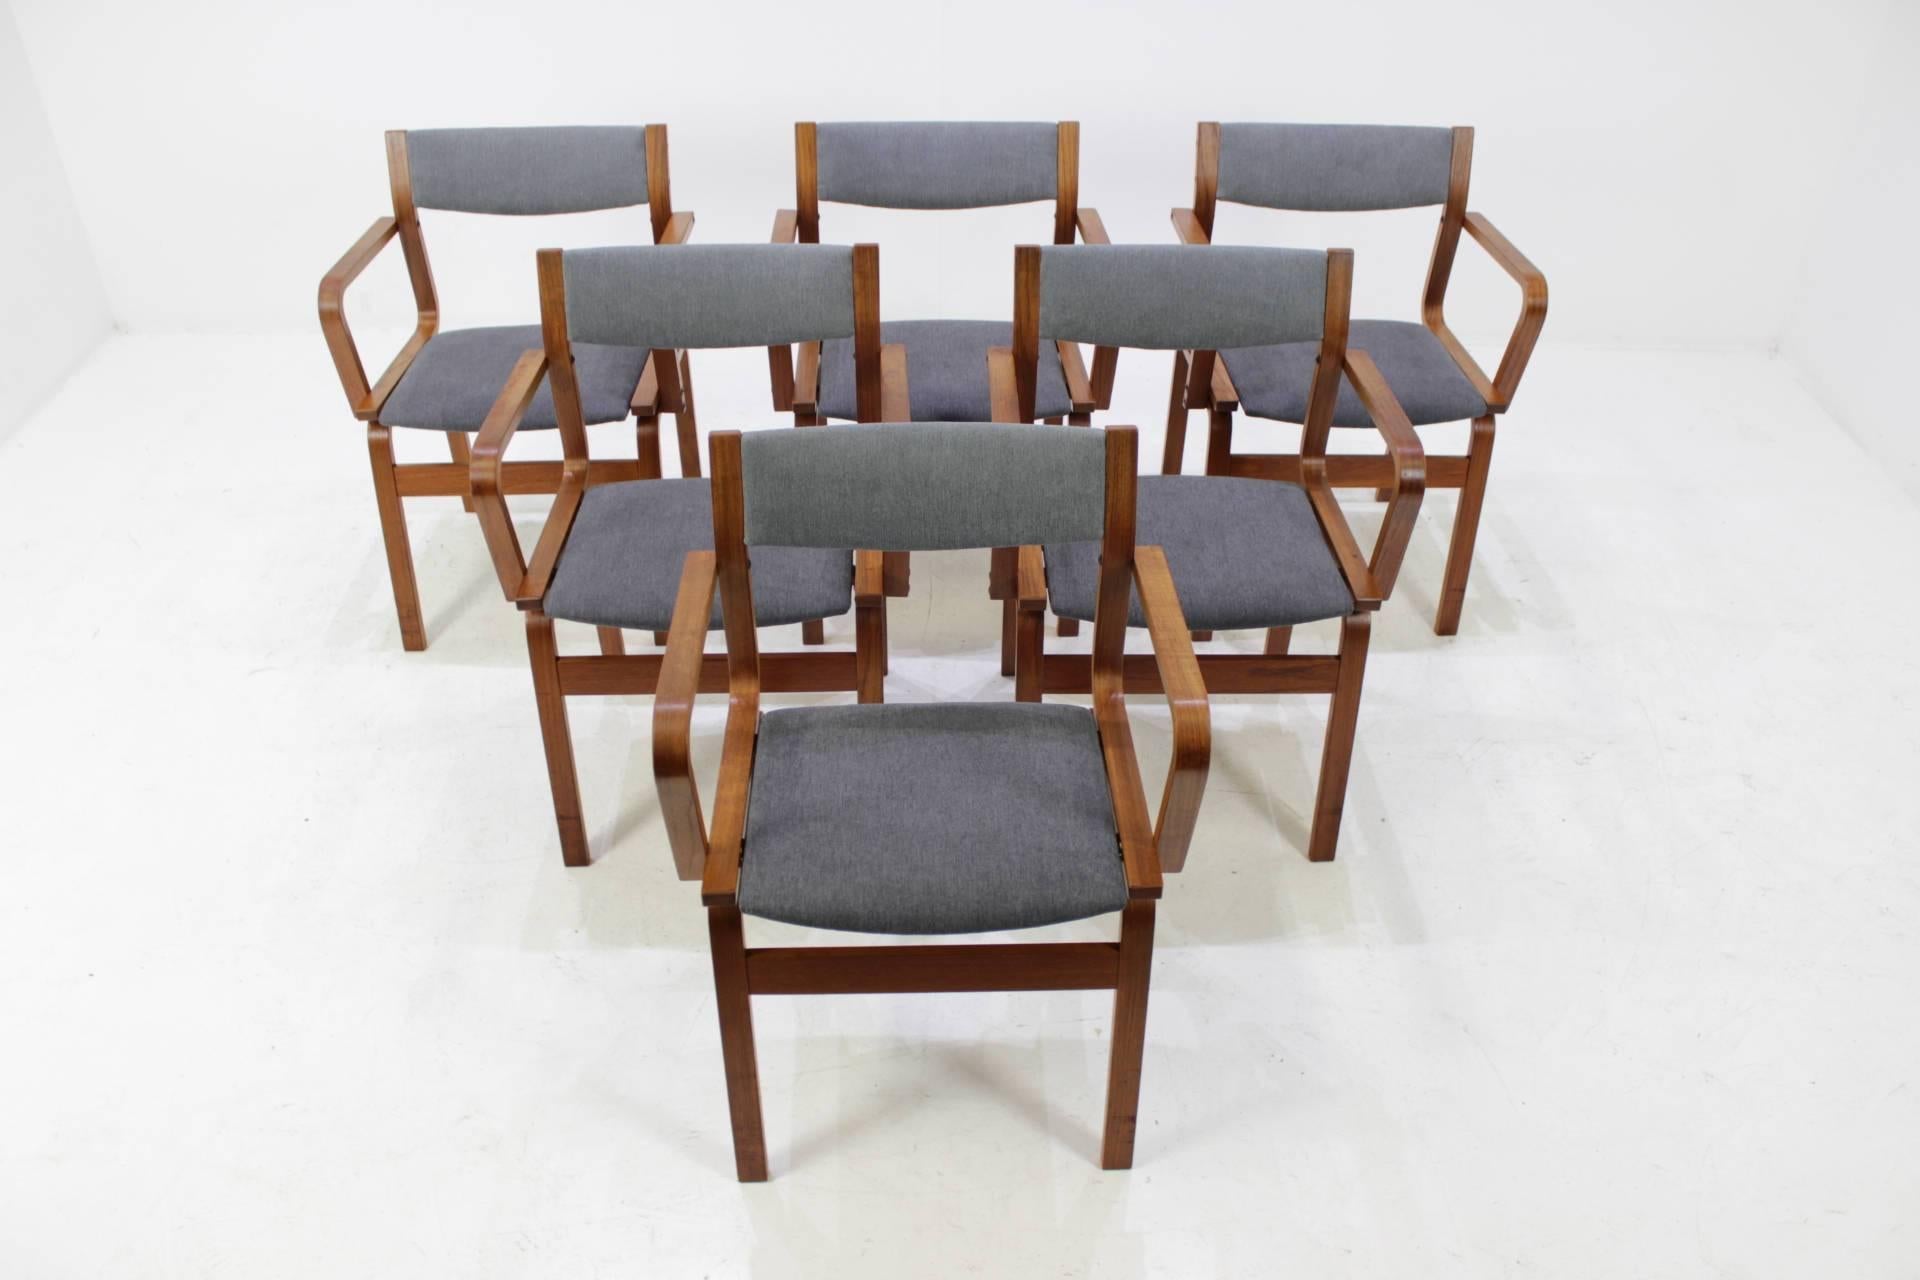 The frame of each one is made from bentwood plywood and top has teak veneer. Newly upholstered. Partly renovated.